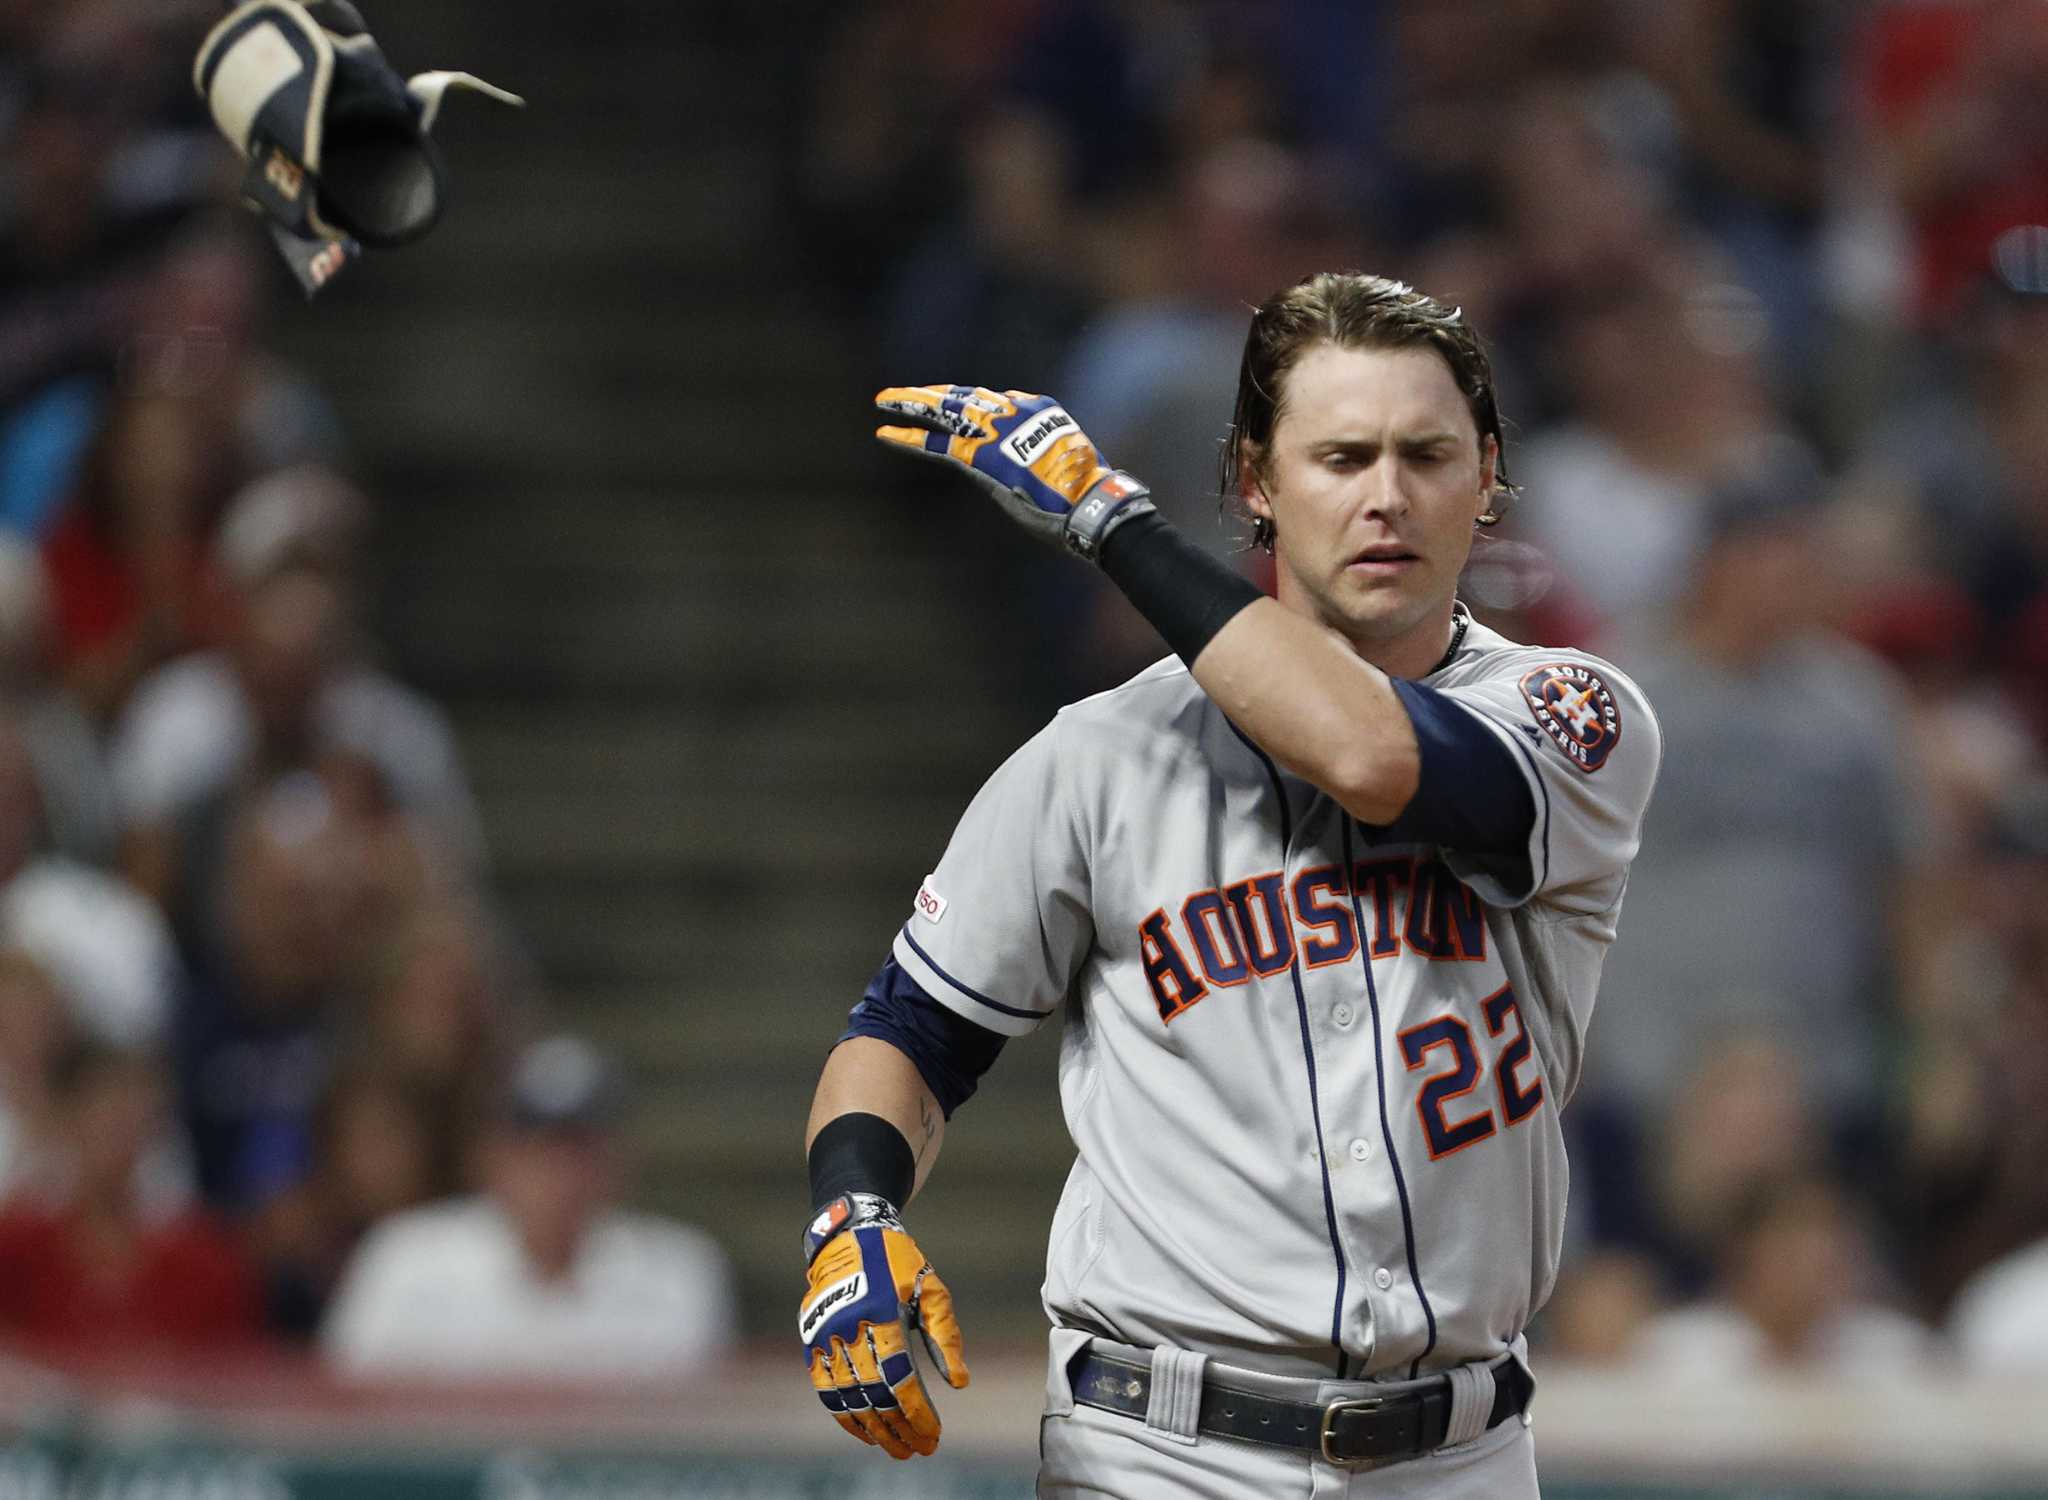 Astros outfielder Josh Reddick's time with Dodgers downright awful